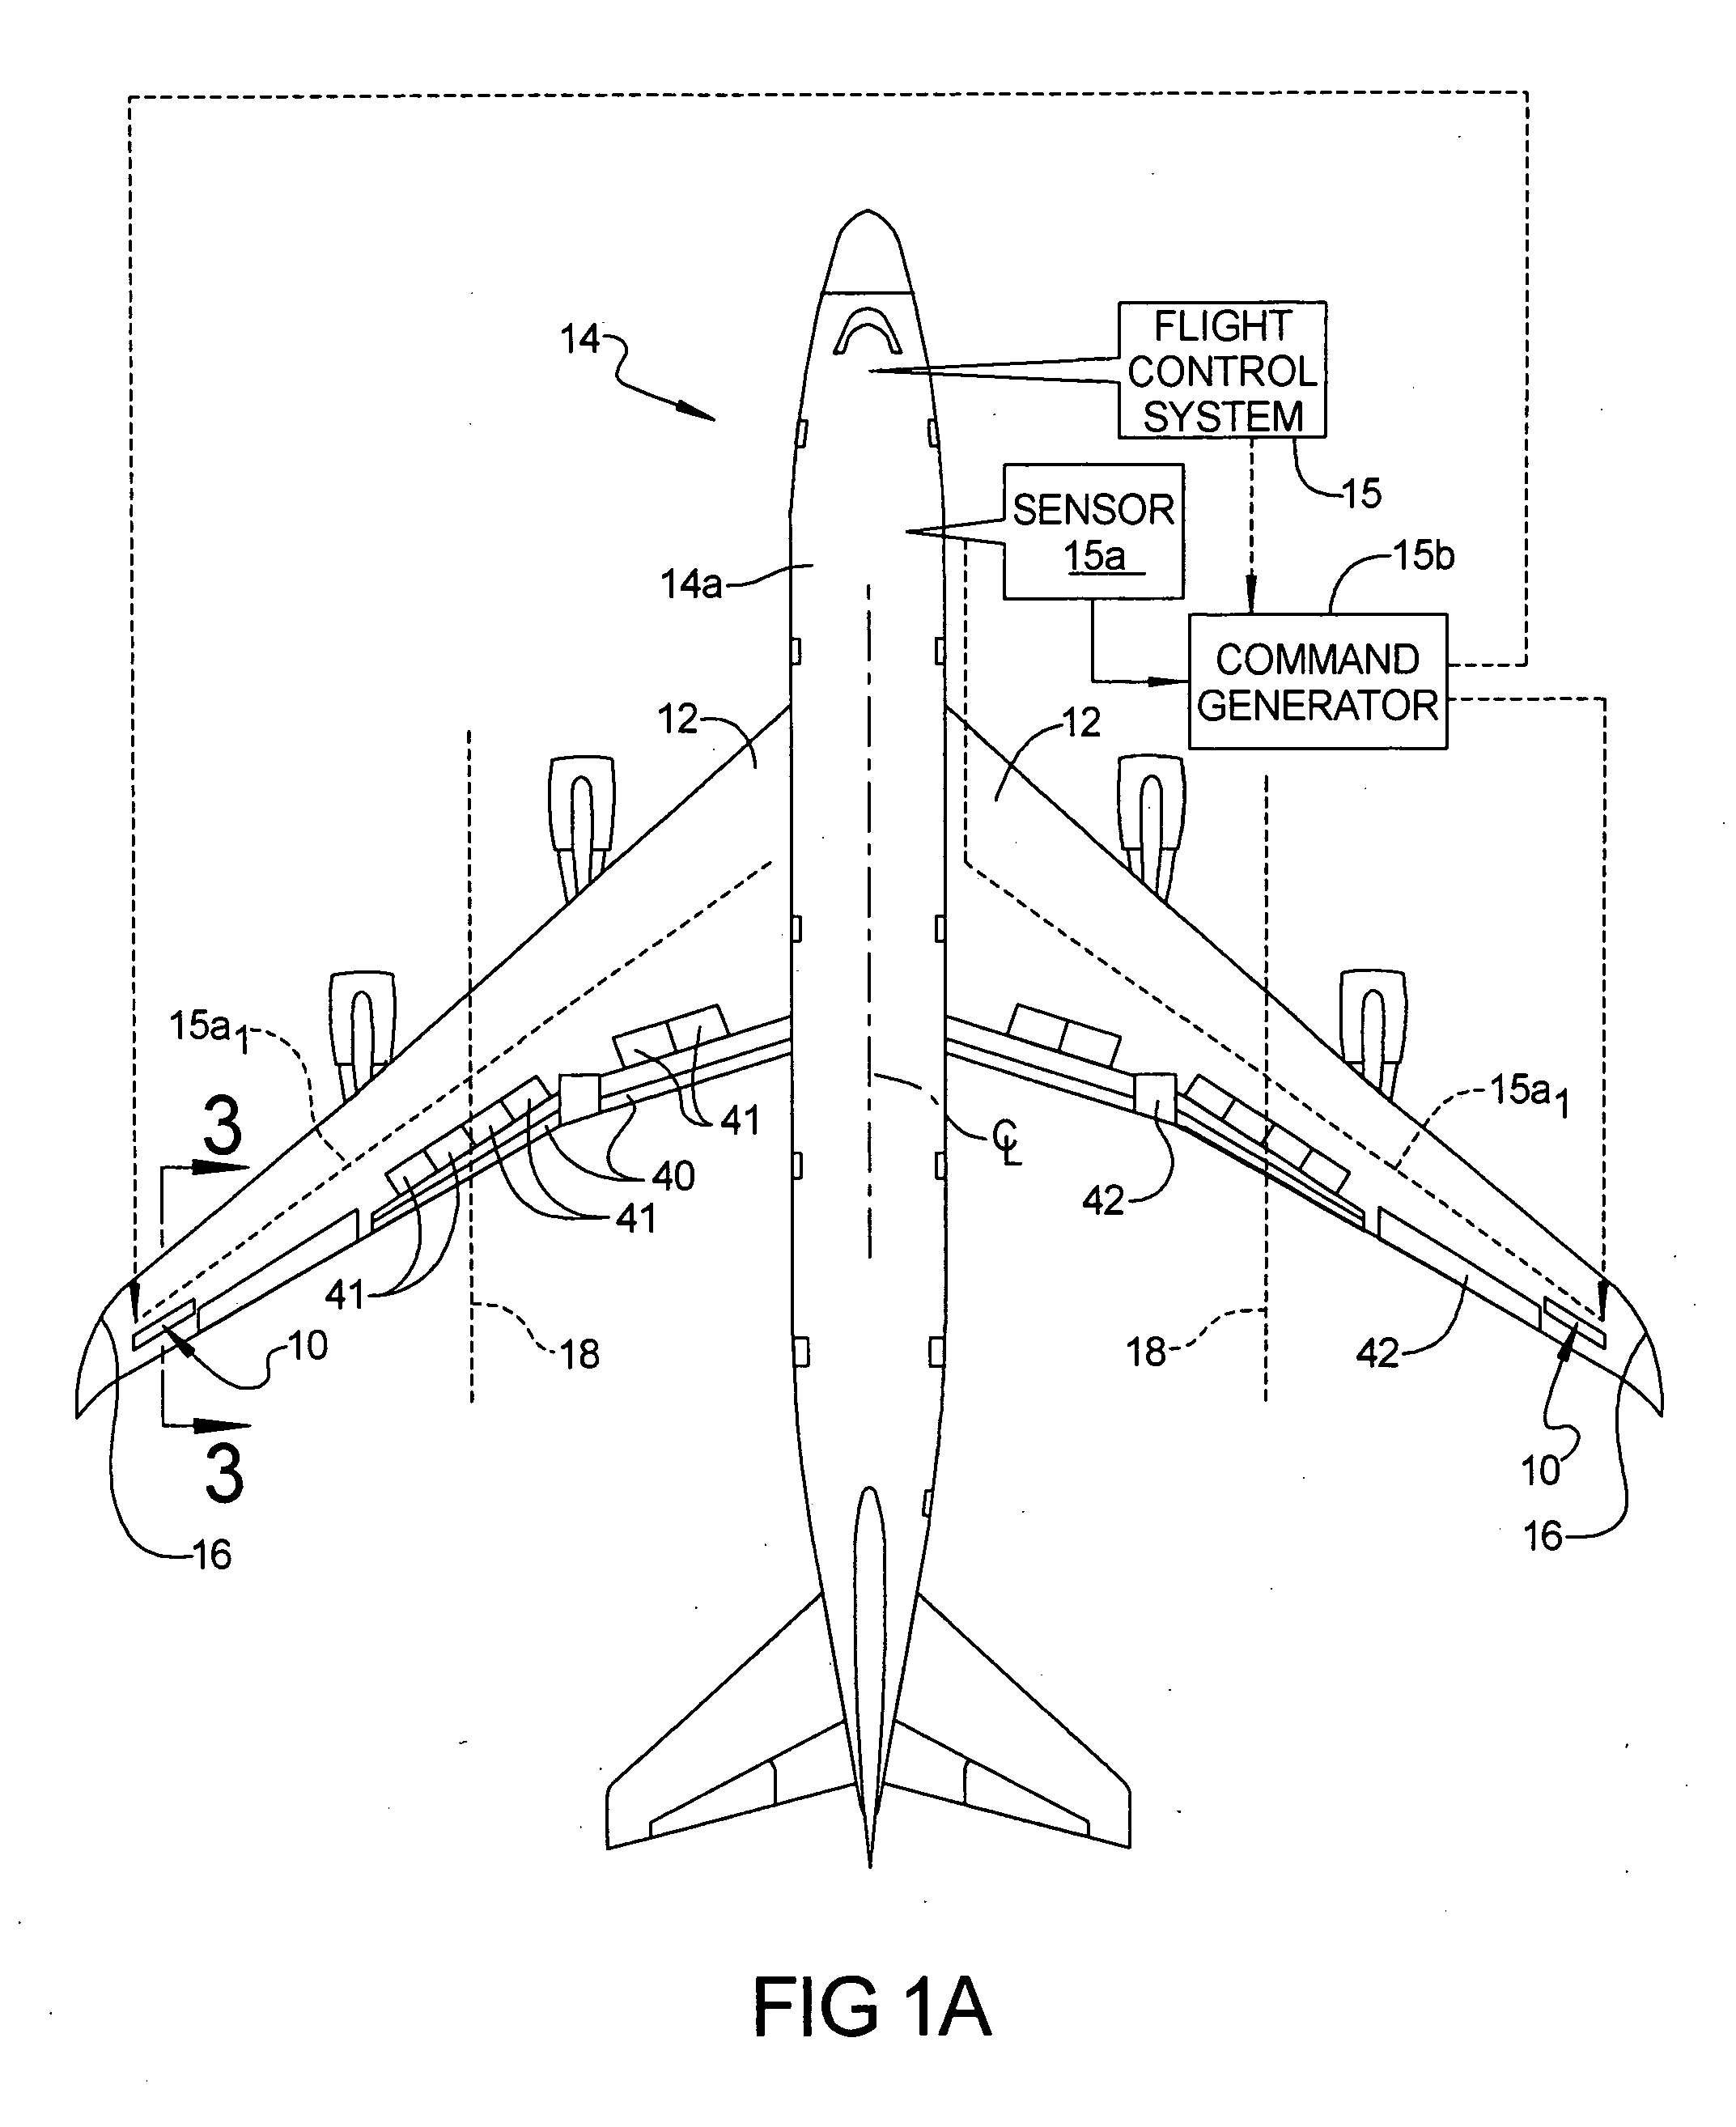 Wing load alleviation apparatus and method